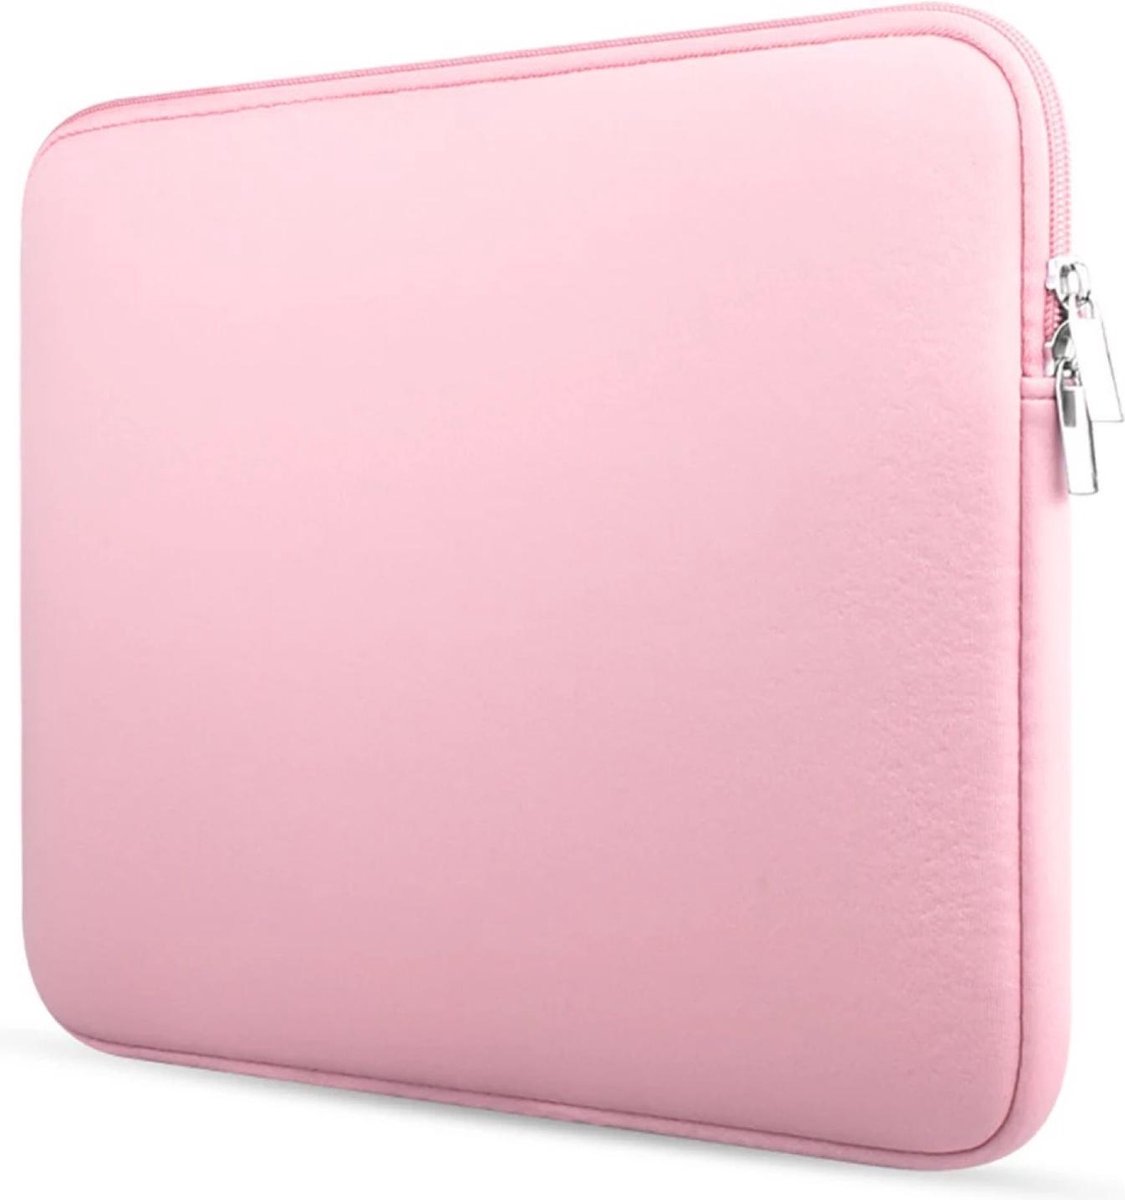 SoftTouch – laptophoes – 14,6 inch – ritssluiting – roze kleur - Notebook Tas - Soft Touch - spatwaterbestending